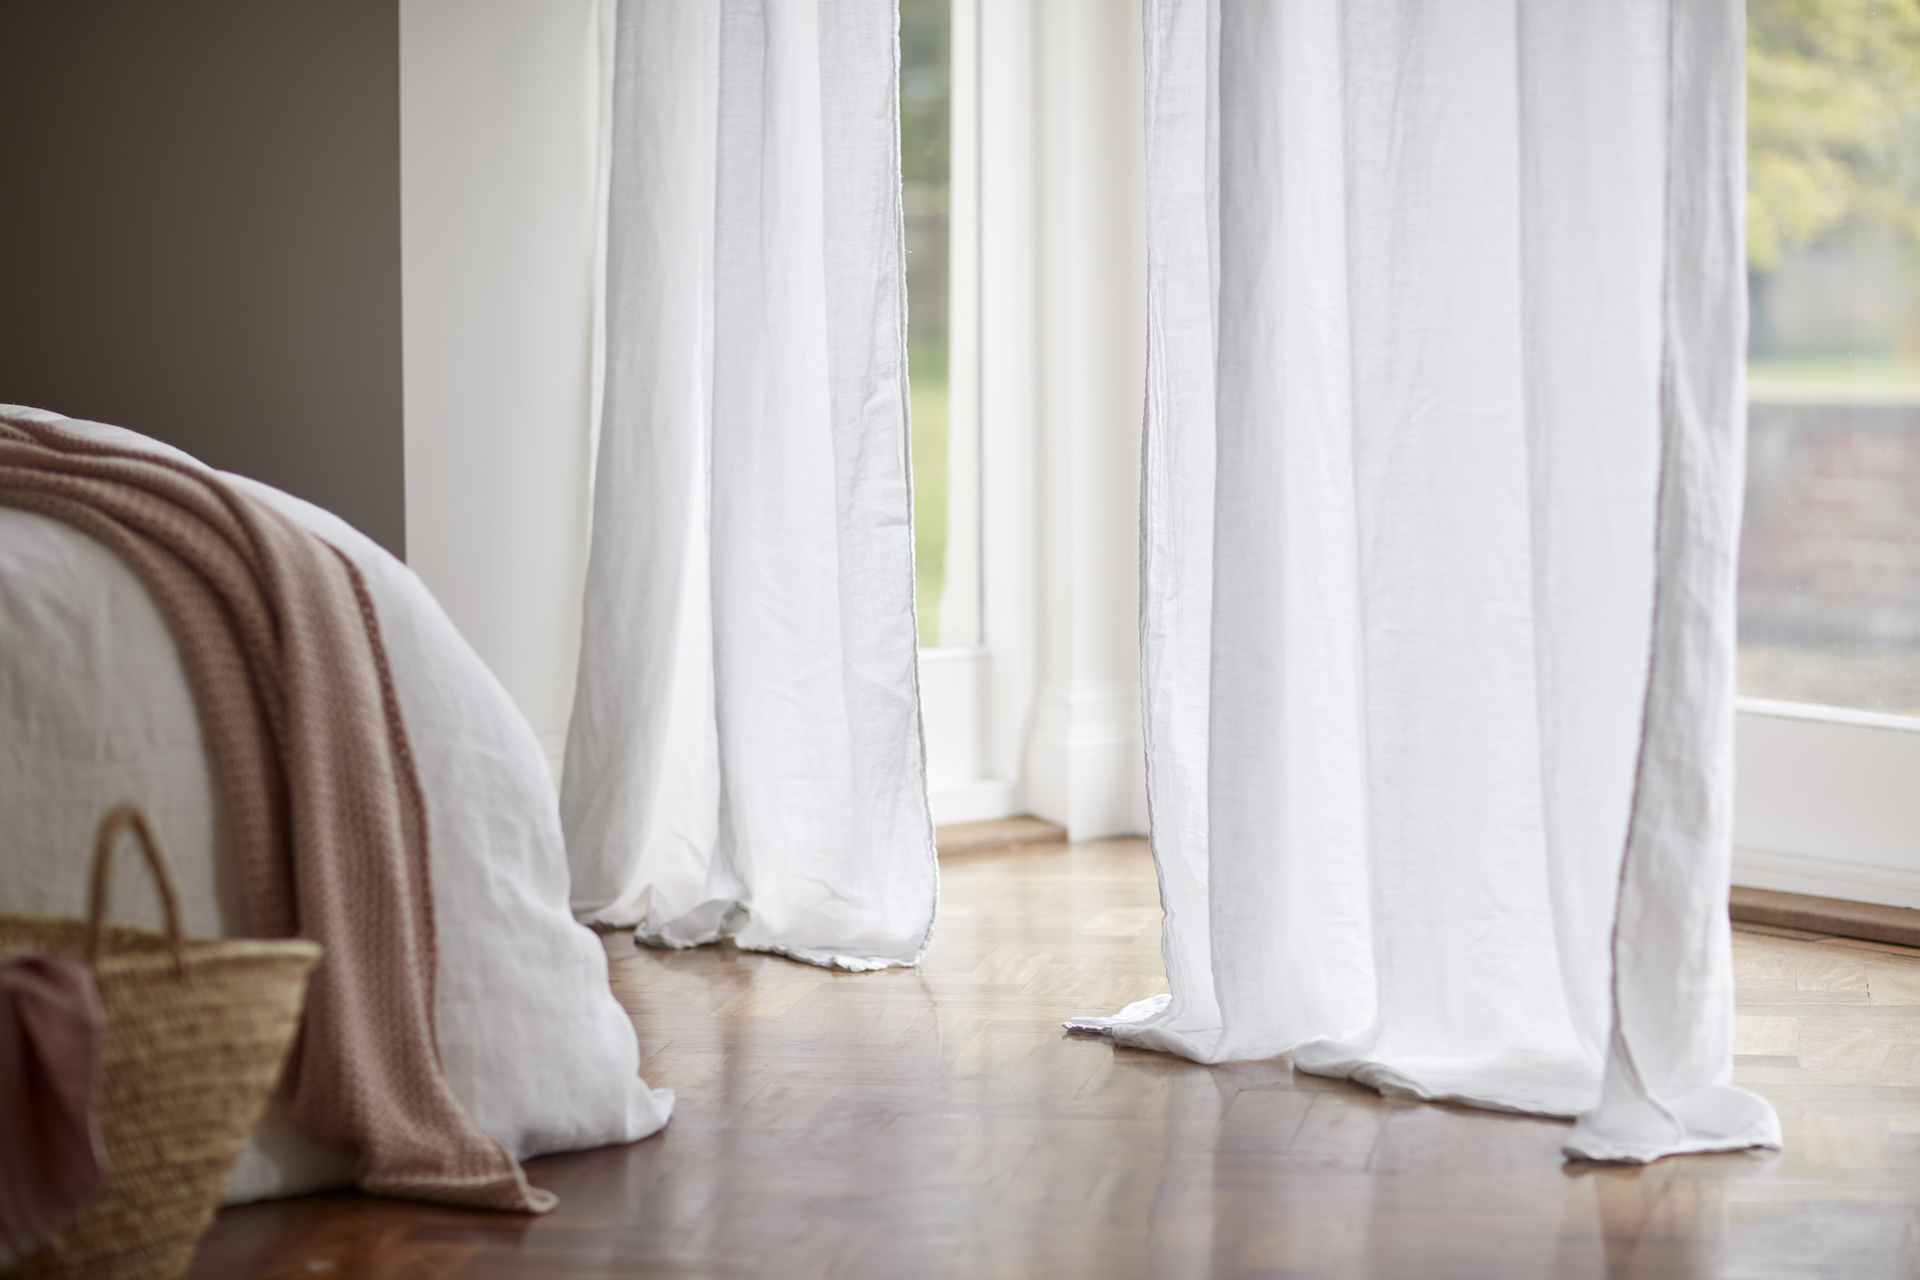 How to hang curtains without drilling: 5 solutions for renters